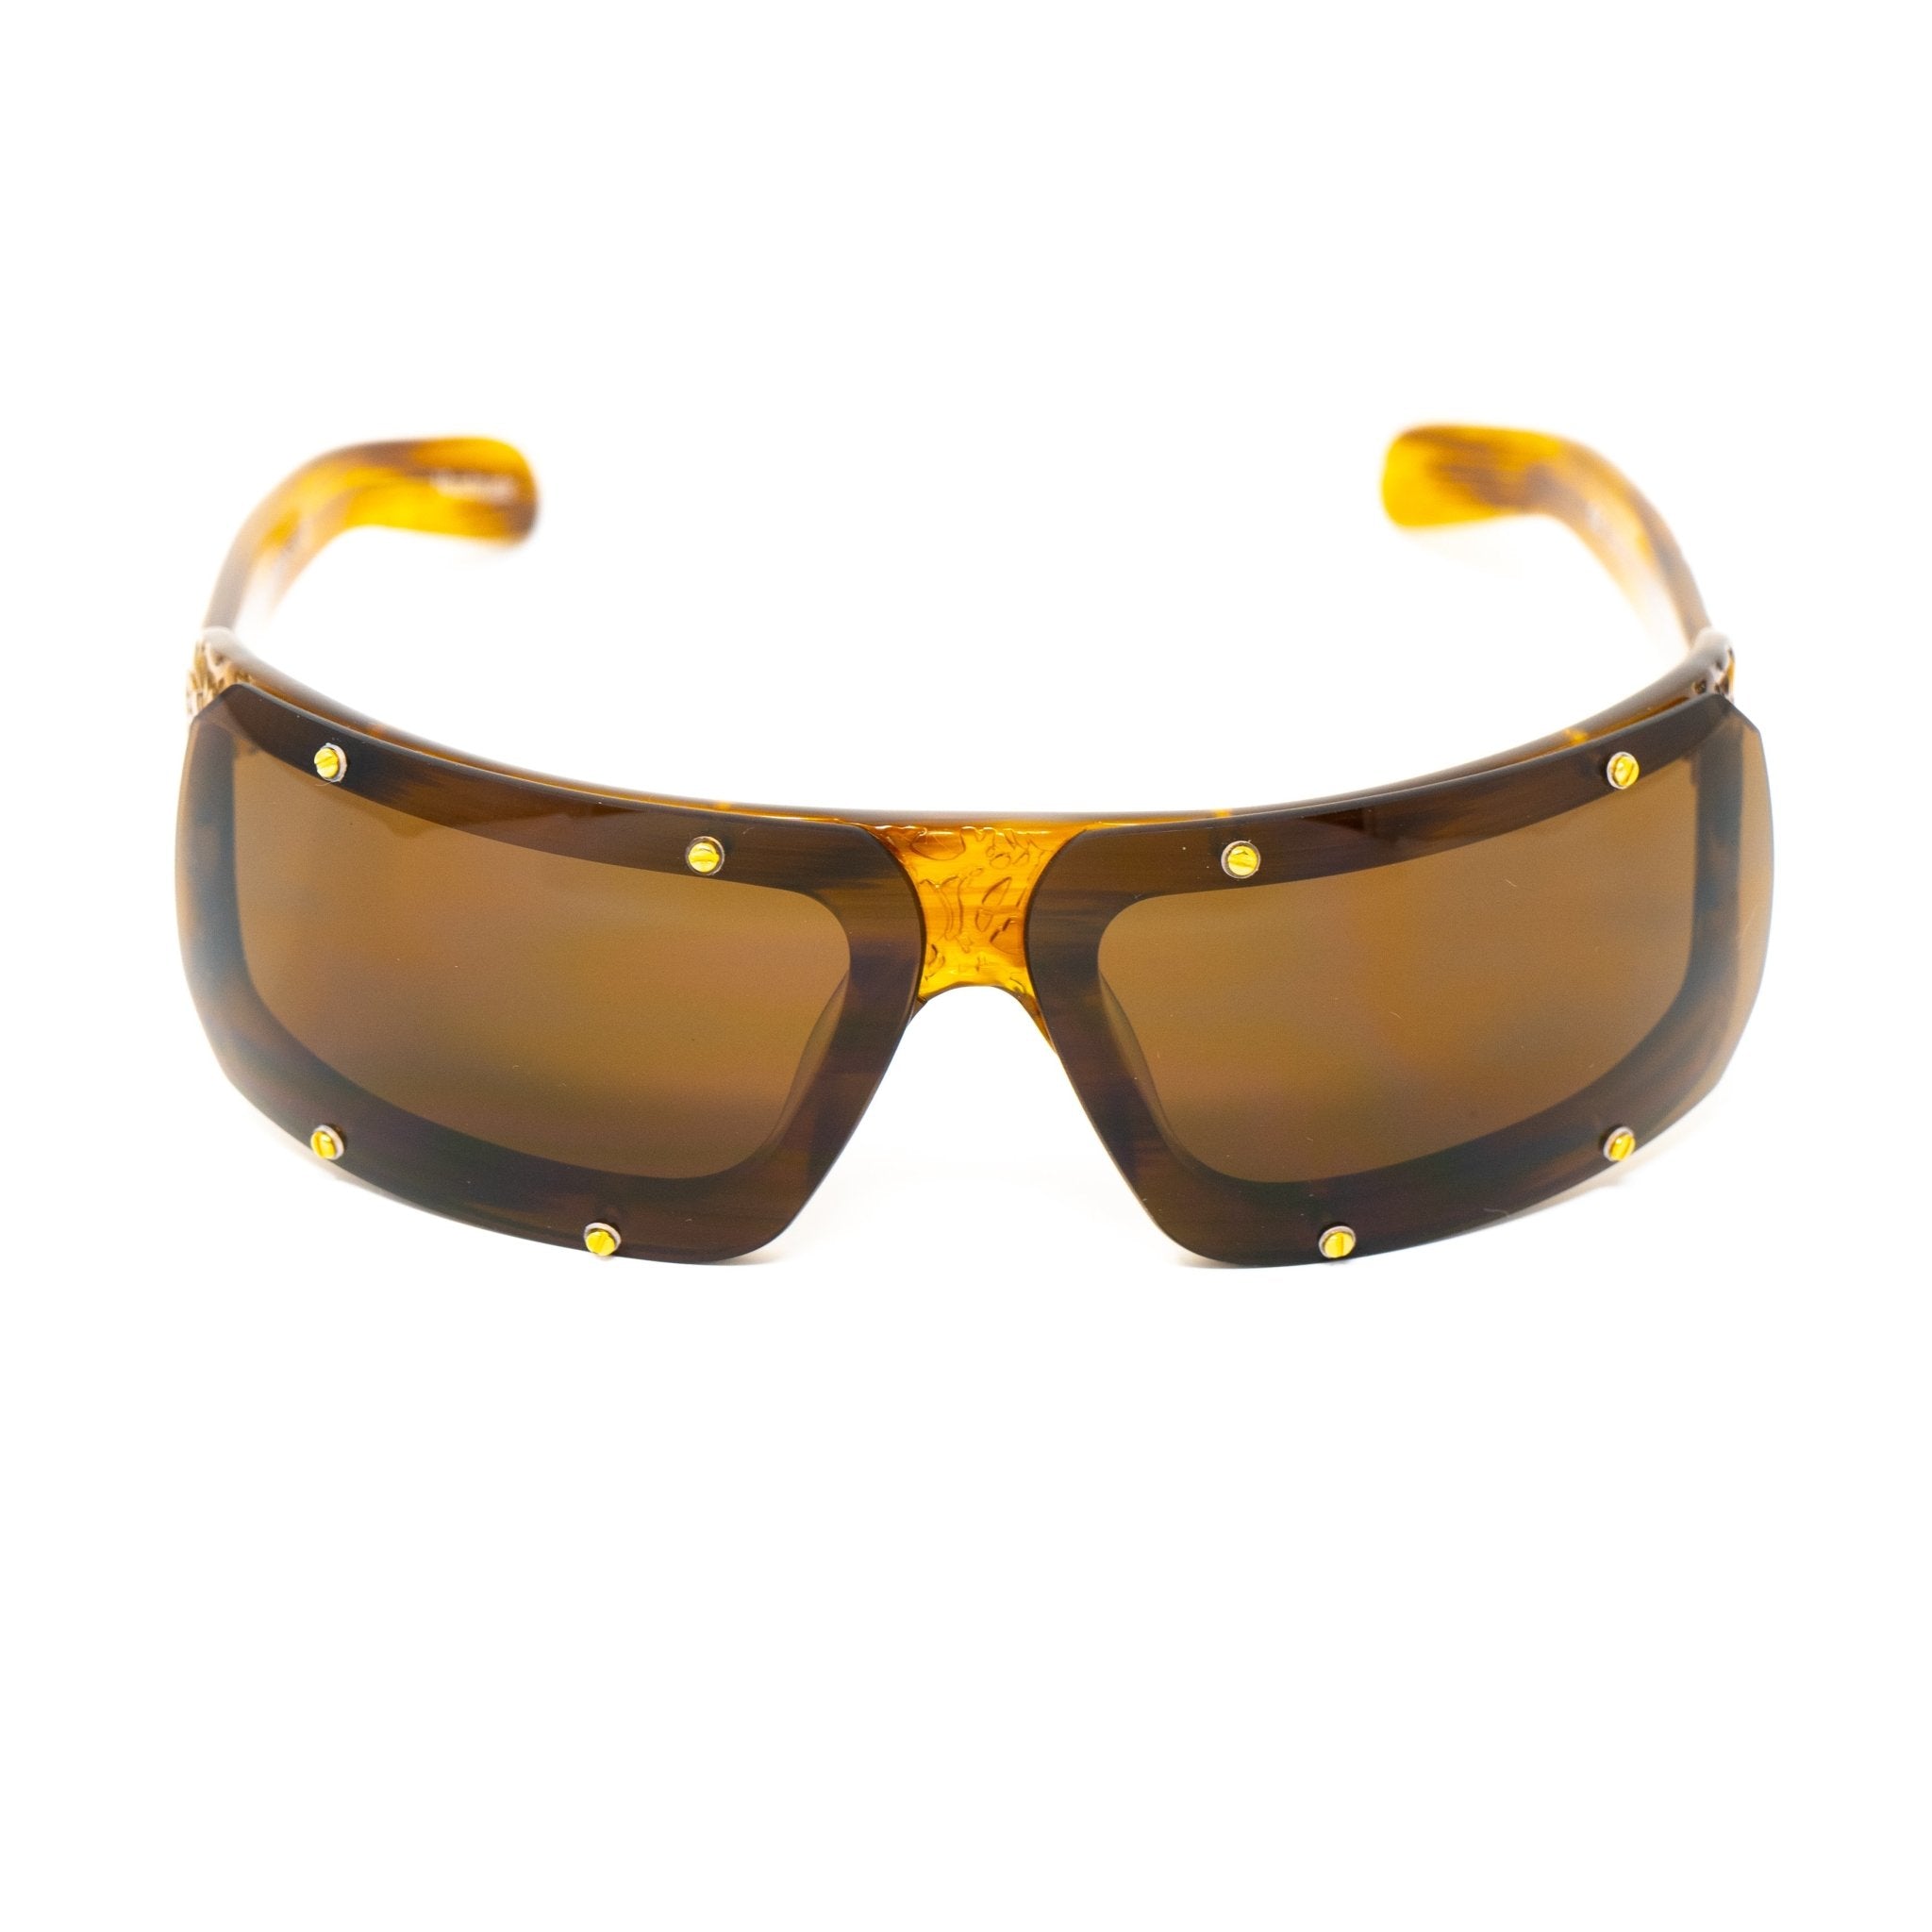 Buddhist Punk Sunglasses Rectangular Tortoise Shell With Brown Lenses Category 3 6BP2C2TSHELL - Watches & Crystals